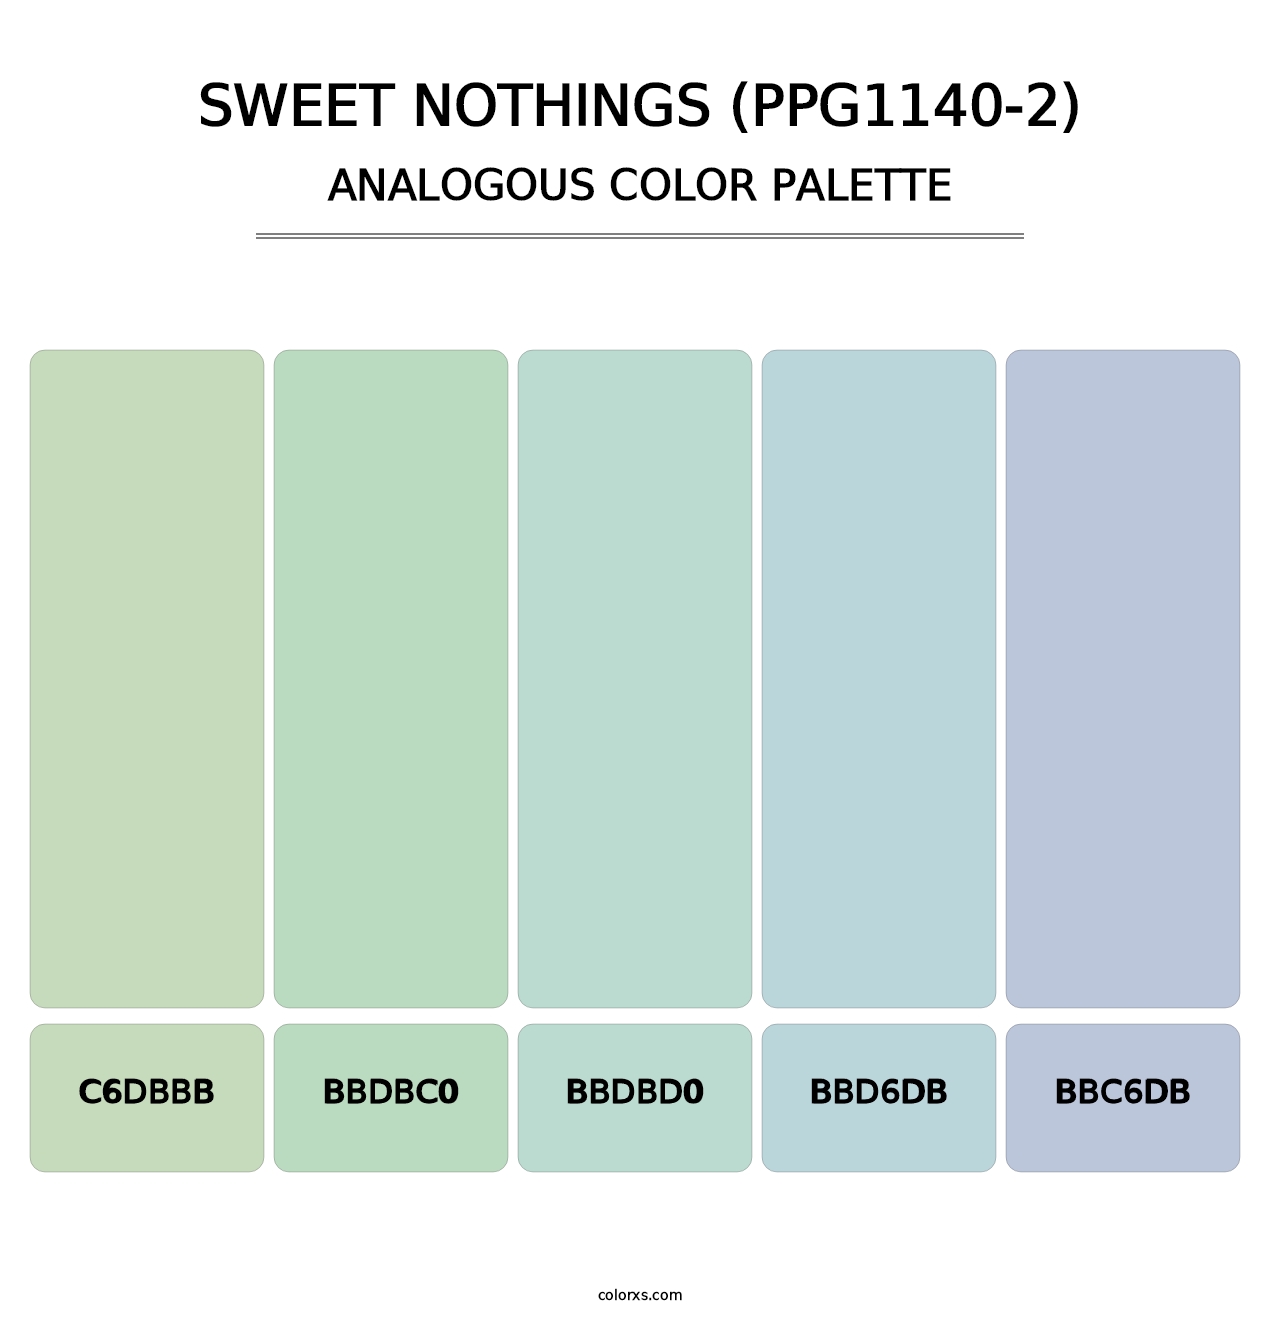 Sweet Nothings (PPG1140-2) - Analogous Color Palette